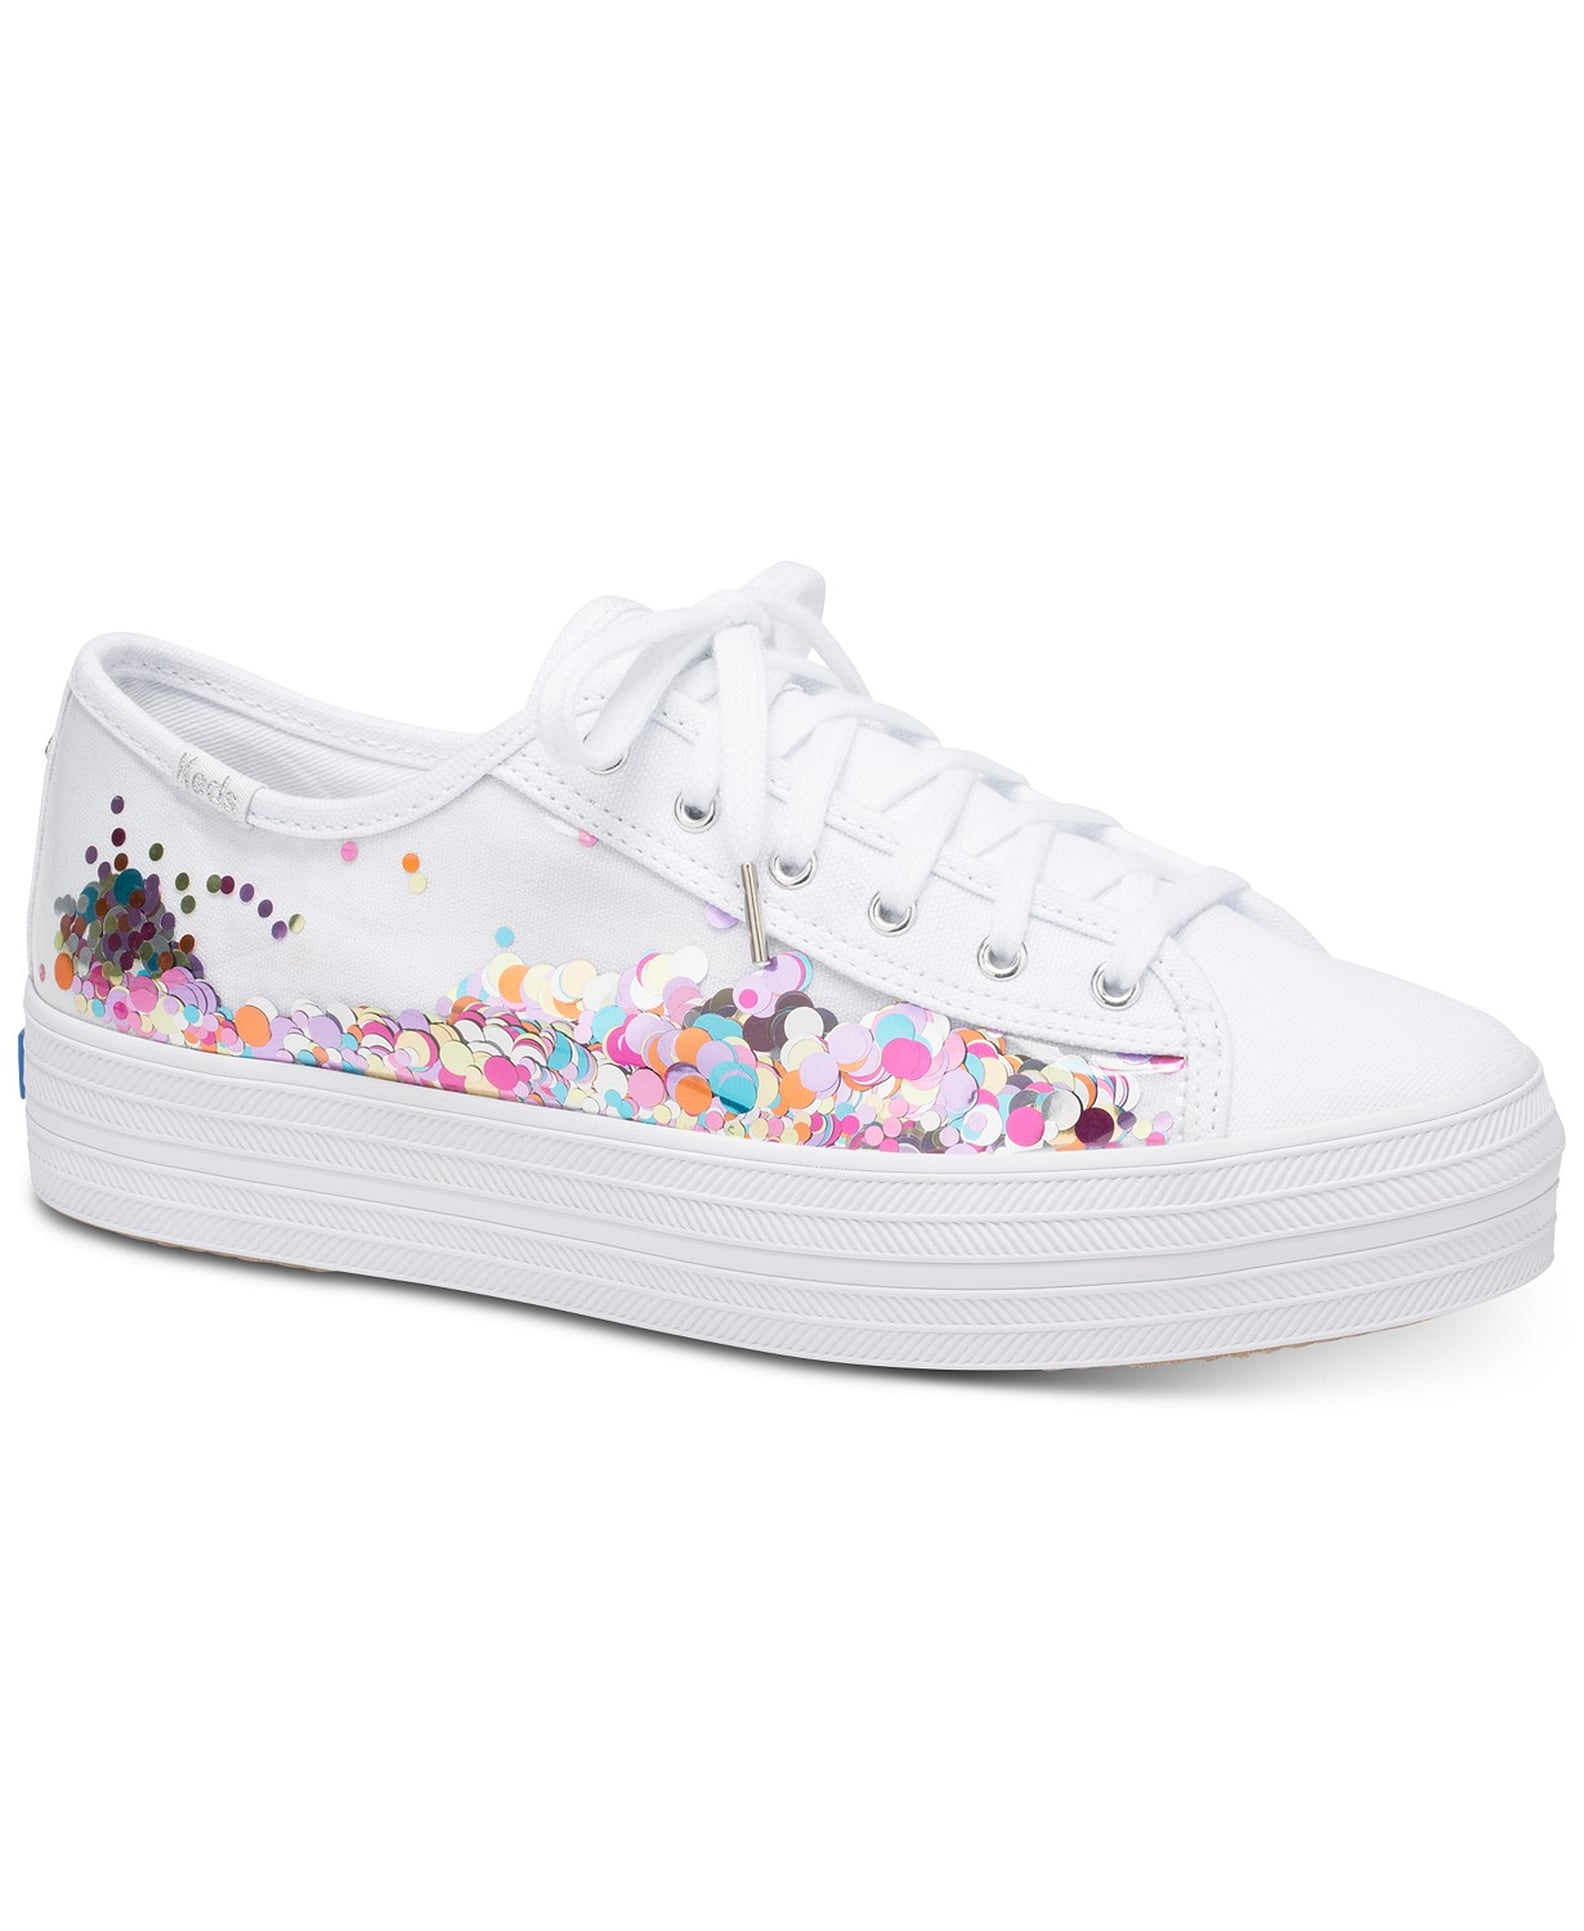 The Best, Cutest Women's Sneakers to Shop at Macy's | POPSUGAR Fashion